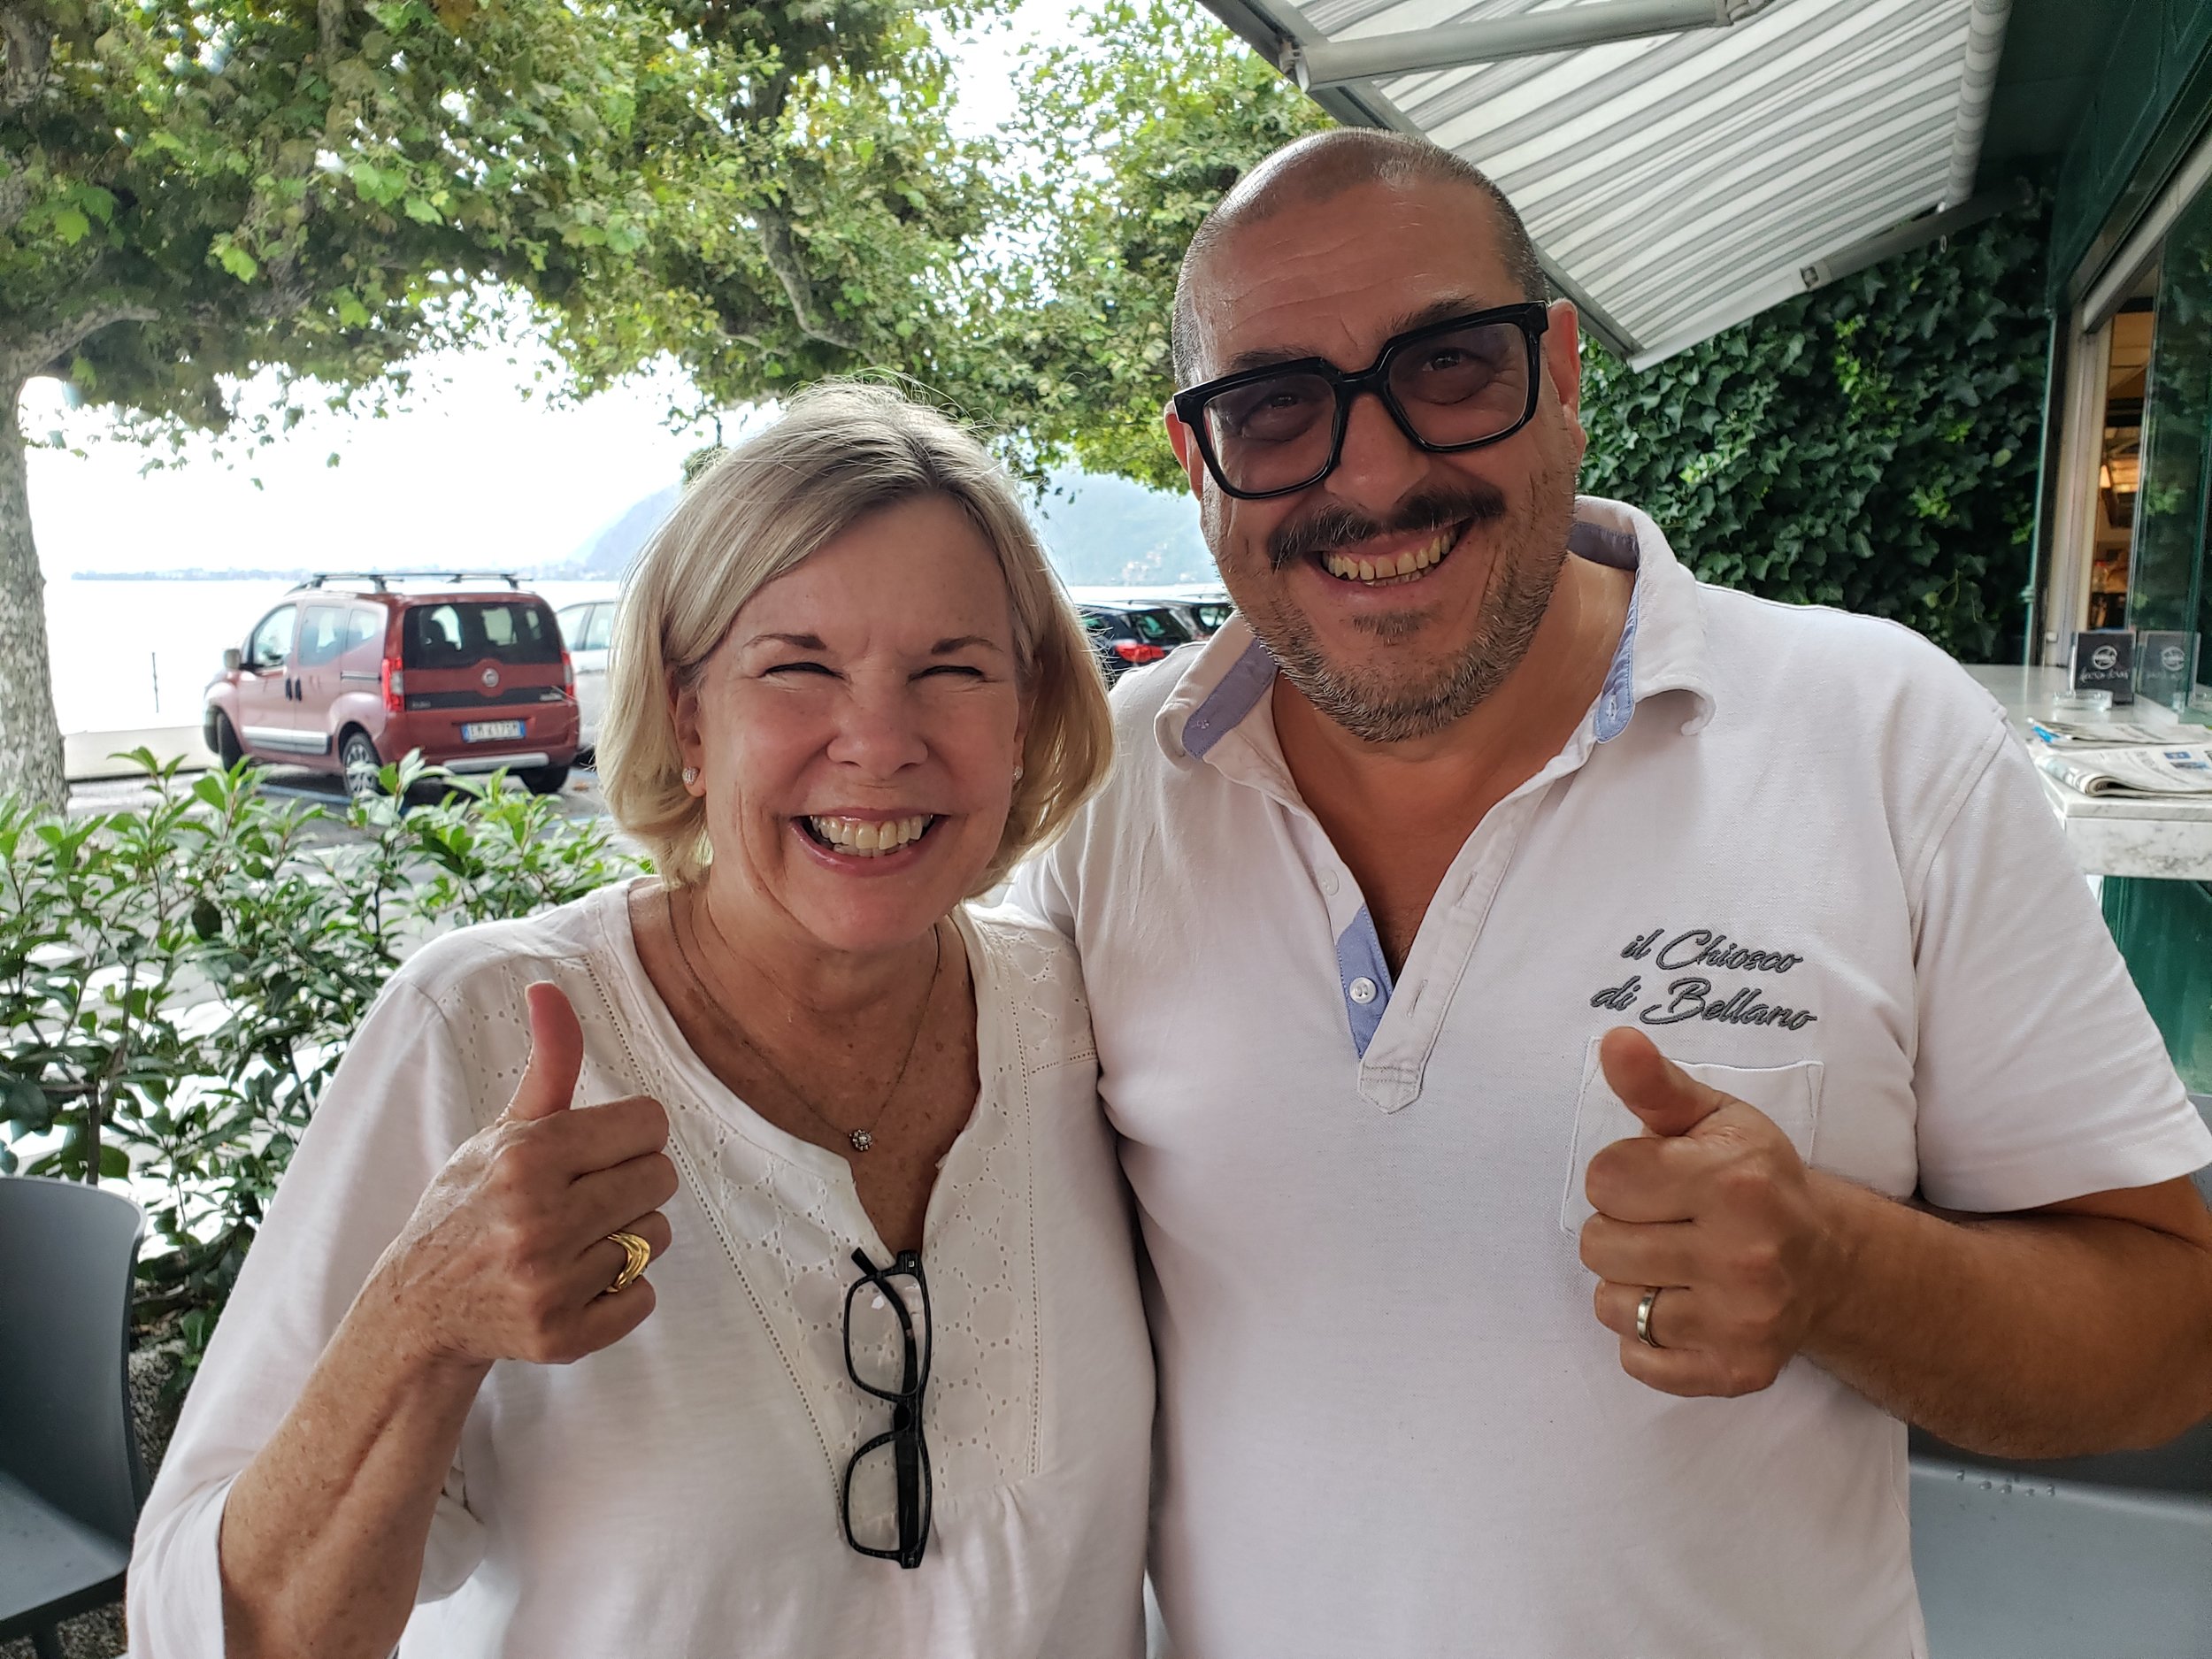  This is Jeri with Mike, the owner of Il Chiosco di Bellano, which is the cafe right outside our apartment.  